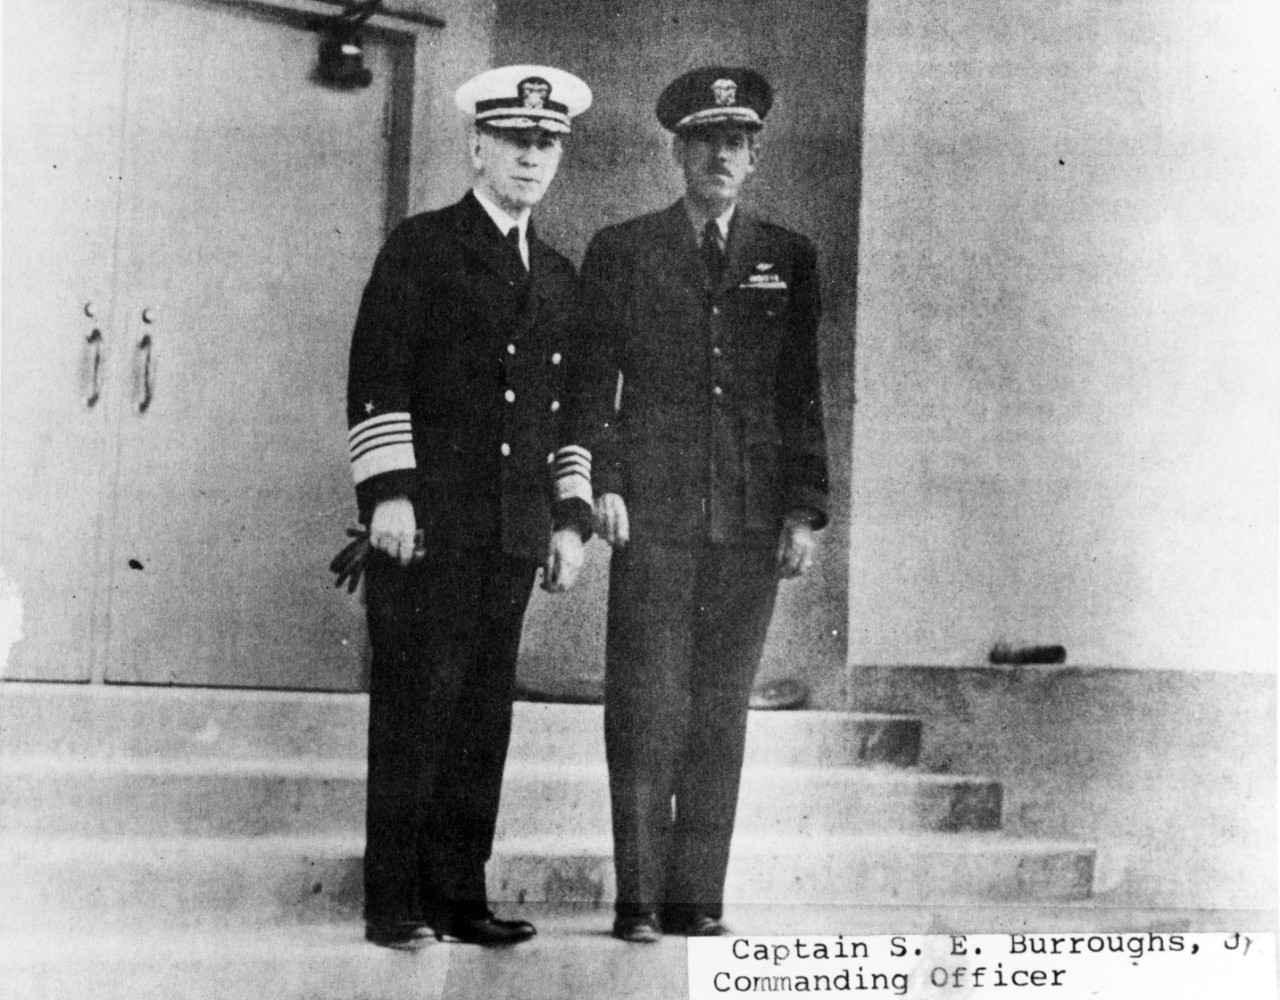 Admiral Royal E. Ingersoll, ComWestern Sea Frontier and Captain S.E. Burroughs Jr., C/O Naval Ordnance Test Station, Inyokern, California.